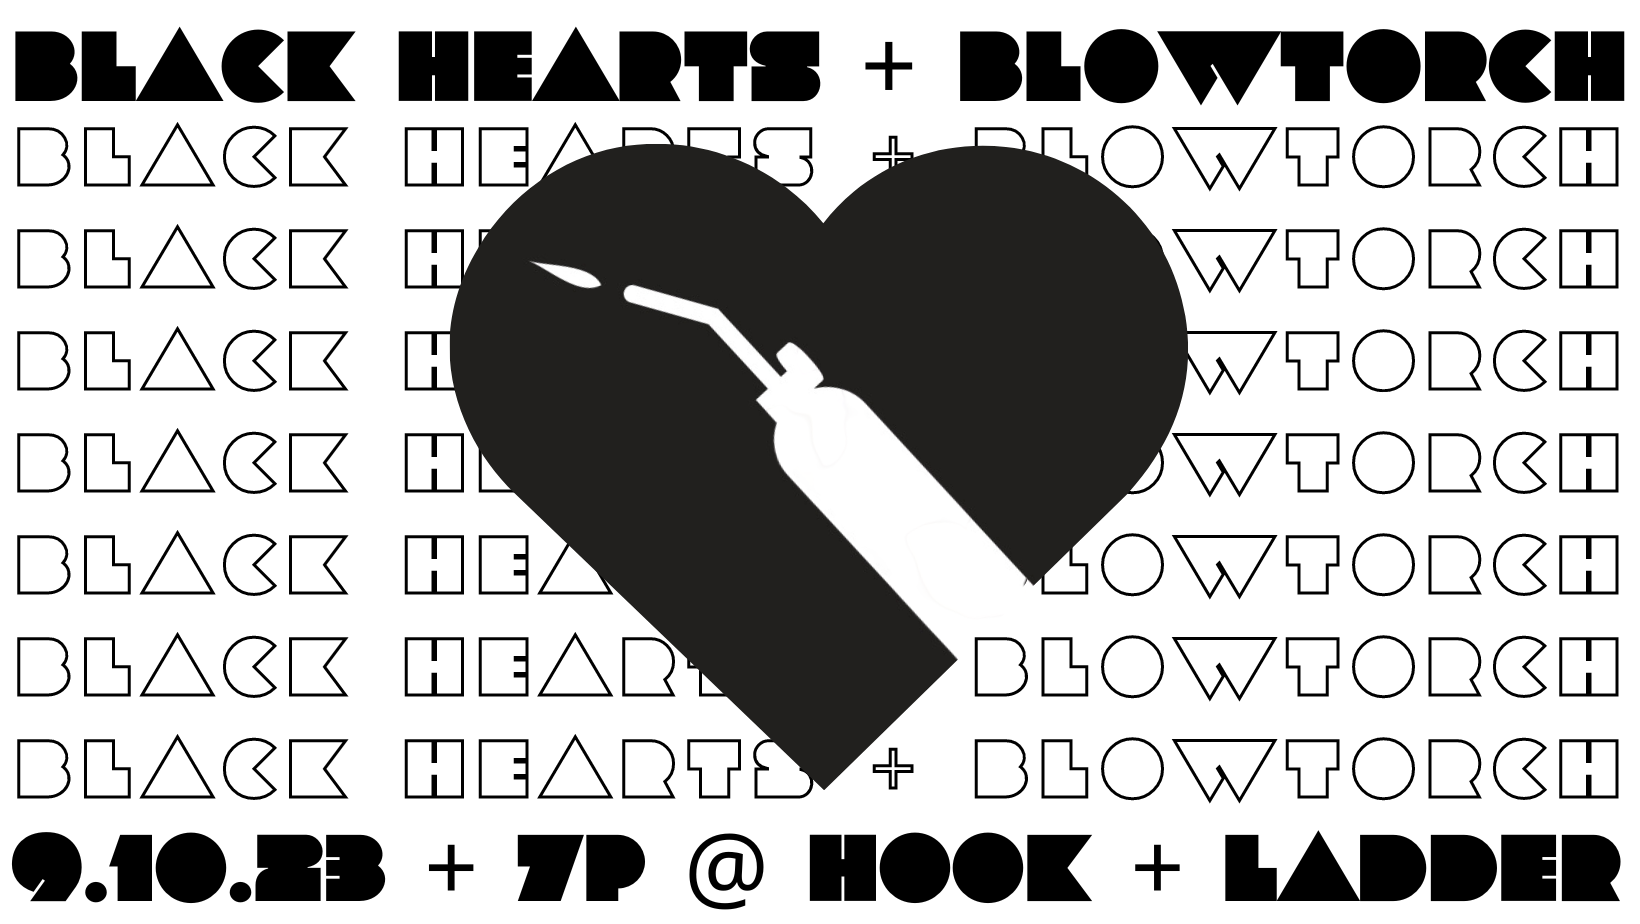 Presented by Shannon Blowtorch, Elektra Cute, The Minneapolis Burlesque Festival, and Hook & Ladder. Black Hearts + Blowtorch Sunday, September 10 The Hook and Ladder Theater Doors 6:00pm :: 21+ Black Hearts Burlesque 7pm - 9pm Dance Party 9pm - 1am :: 21+ *Silent Auction Closes at 10pm VIP: $40 ADV / $45 DOS General Admission: $25 ADV / $30 DOS Dance Party (9pm): $10 ADV / $15 DOS